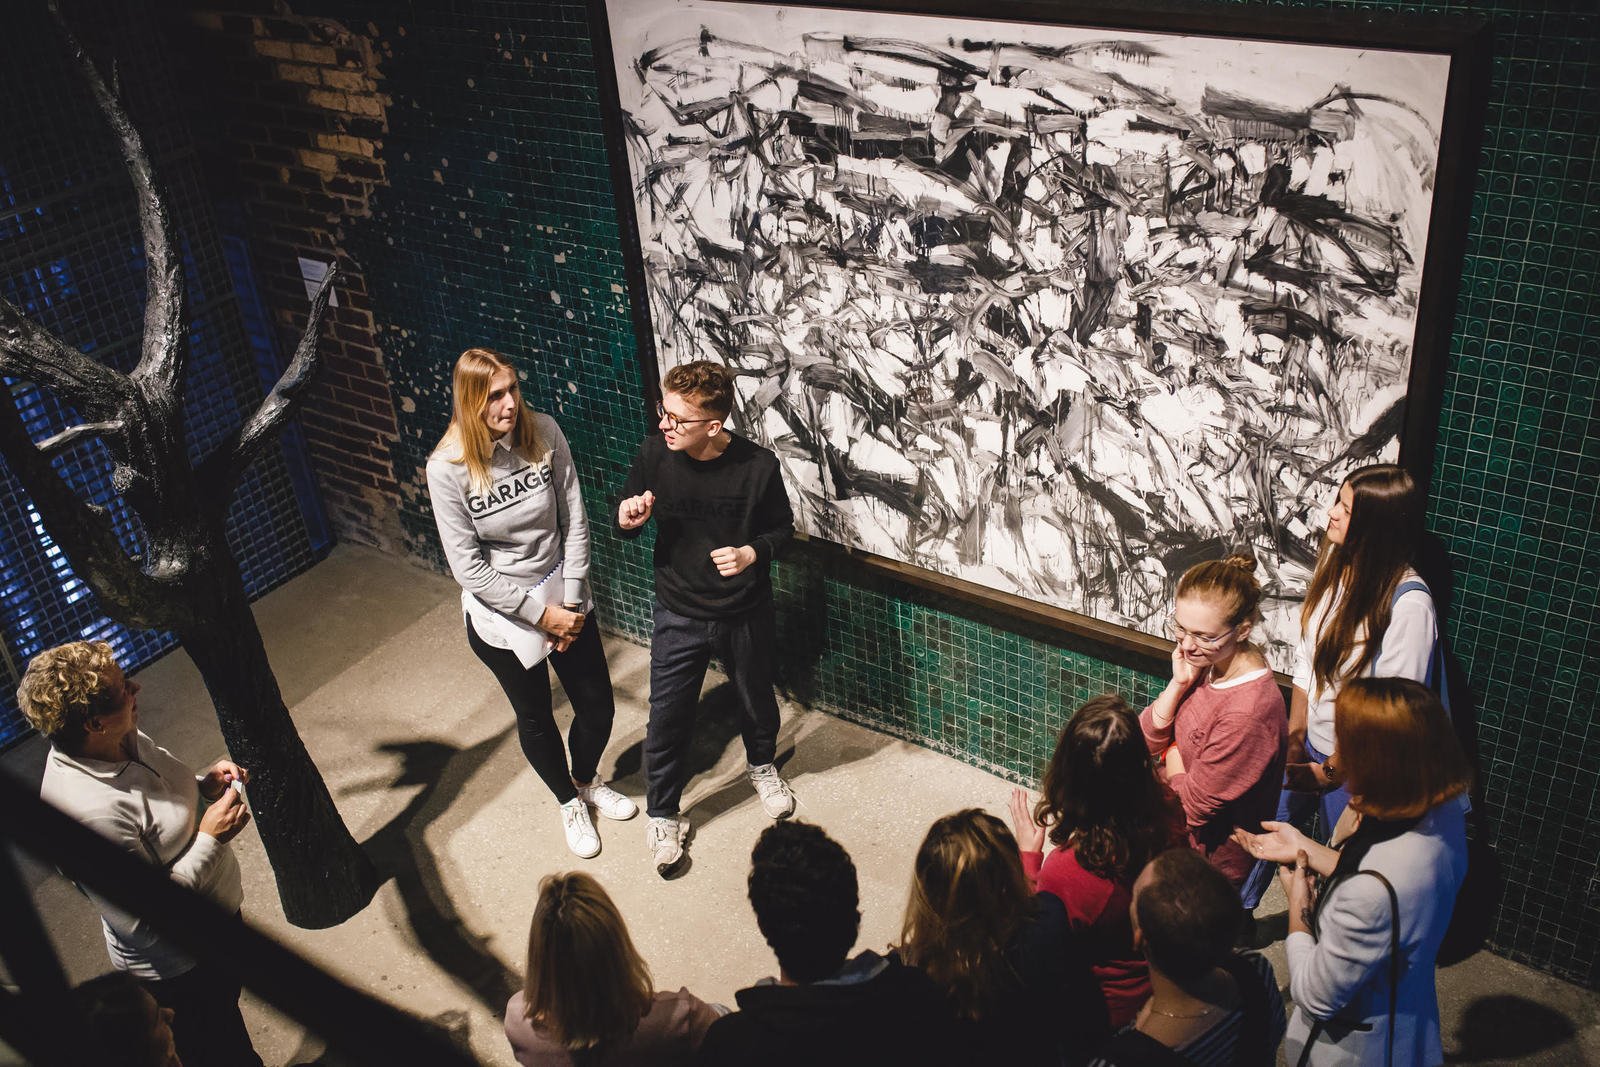 Guided tours in sign language for the fall exhibition season